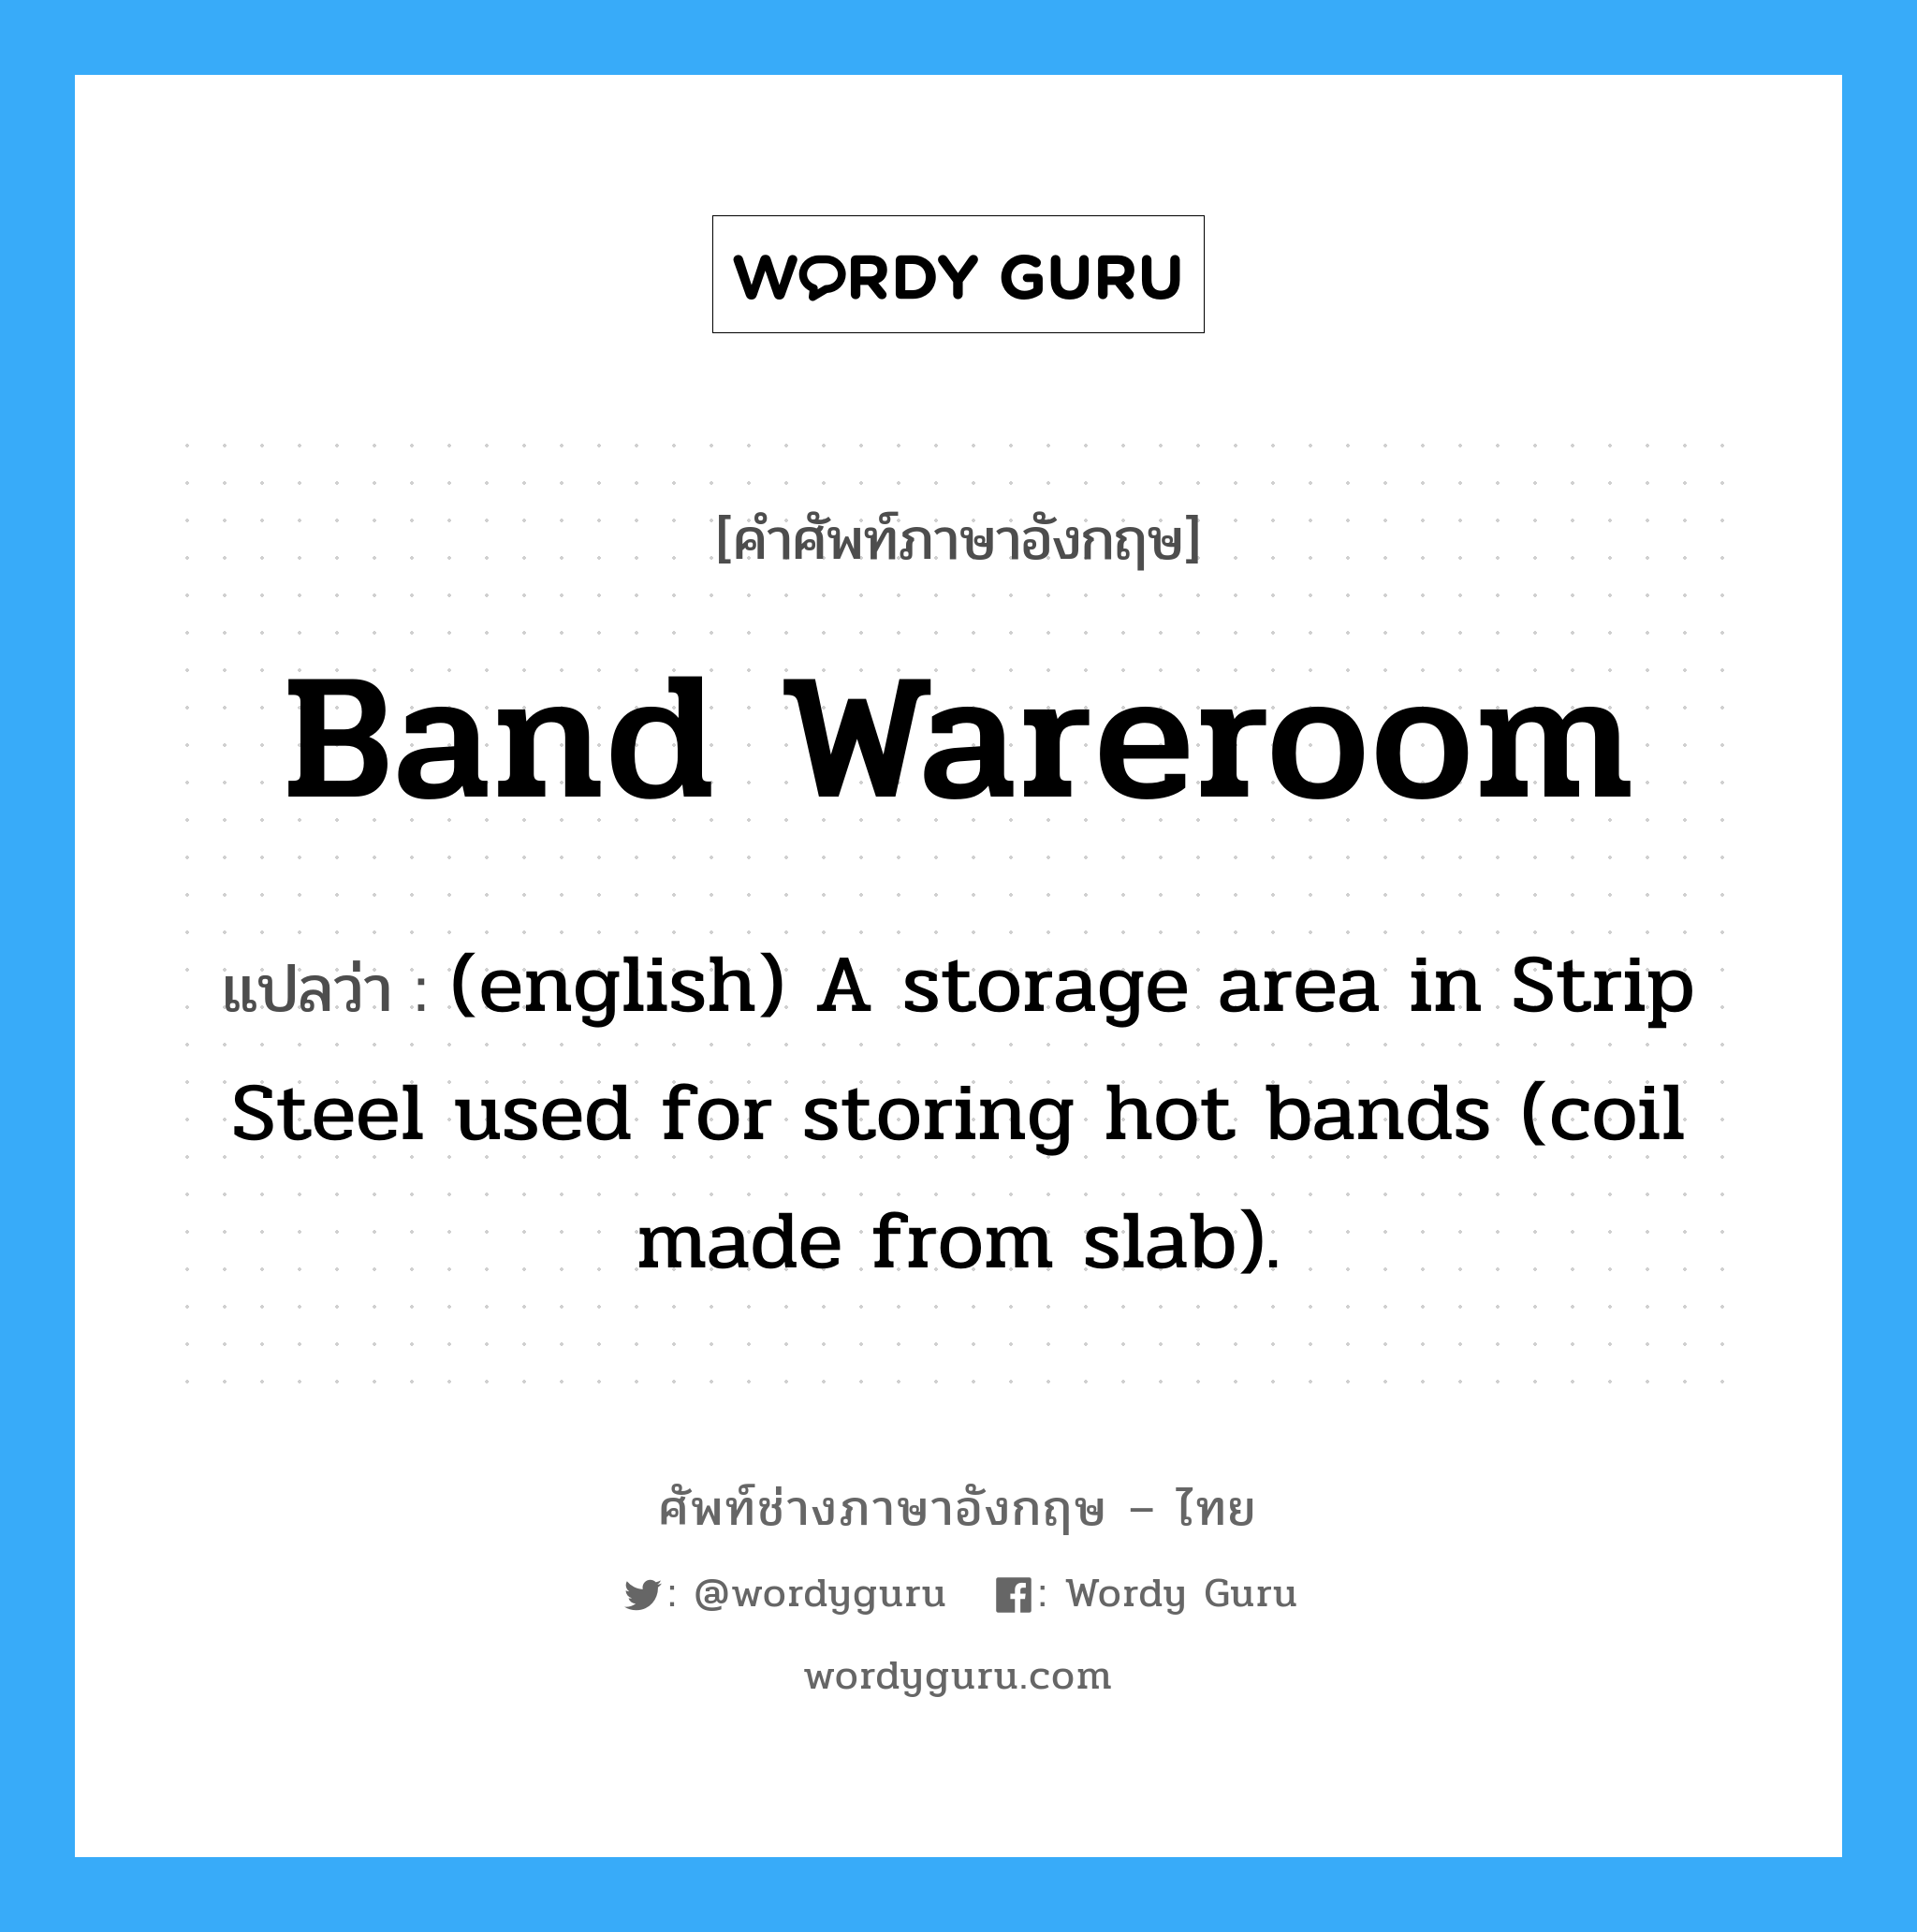 Band Wareroom แปลว่า?, คำศัพท์ช่างภาษาอังกฤษ - ไทย Band Wareroom คำศัพท์ภาษาอังกฤษ Band Wareroom แปลว่า (english) A storage area in Strip Steel used for storing hot bands (coil made from slab).